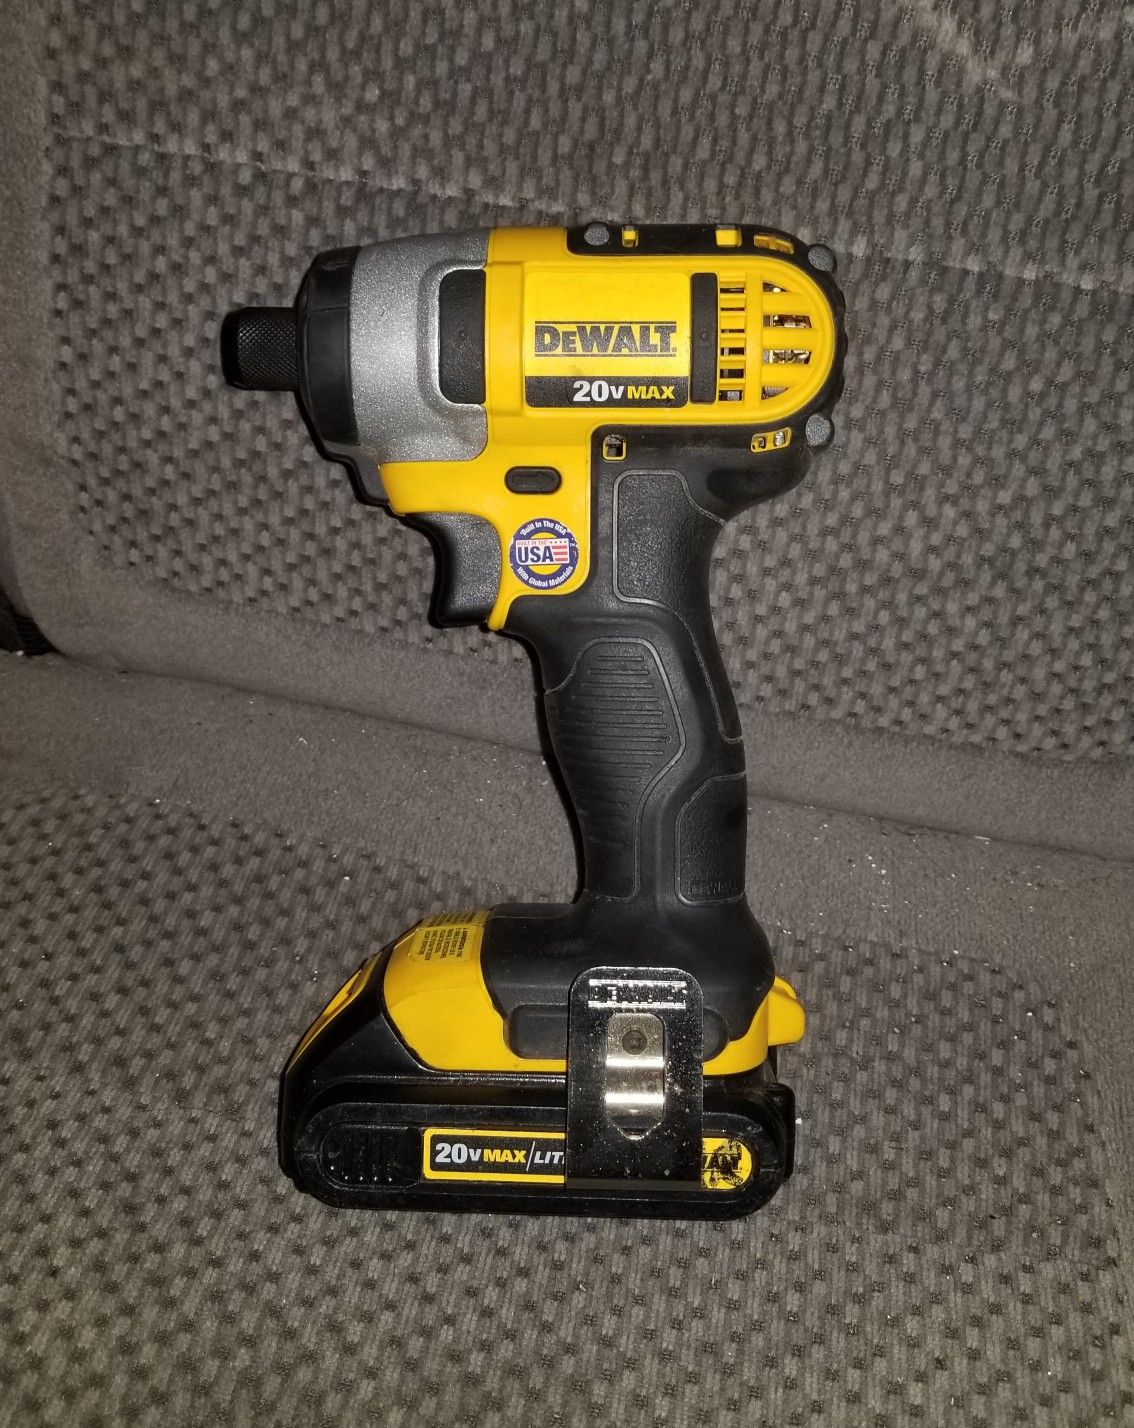 Dewalt Impact driver (¼") with 20v max battery